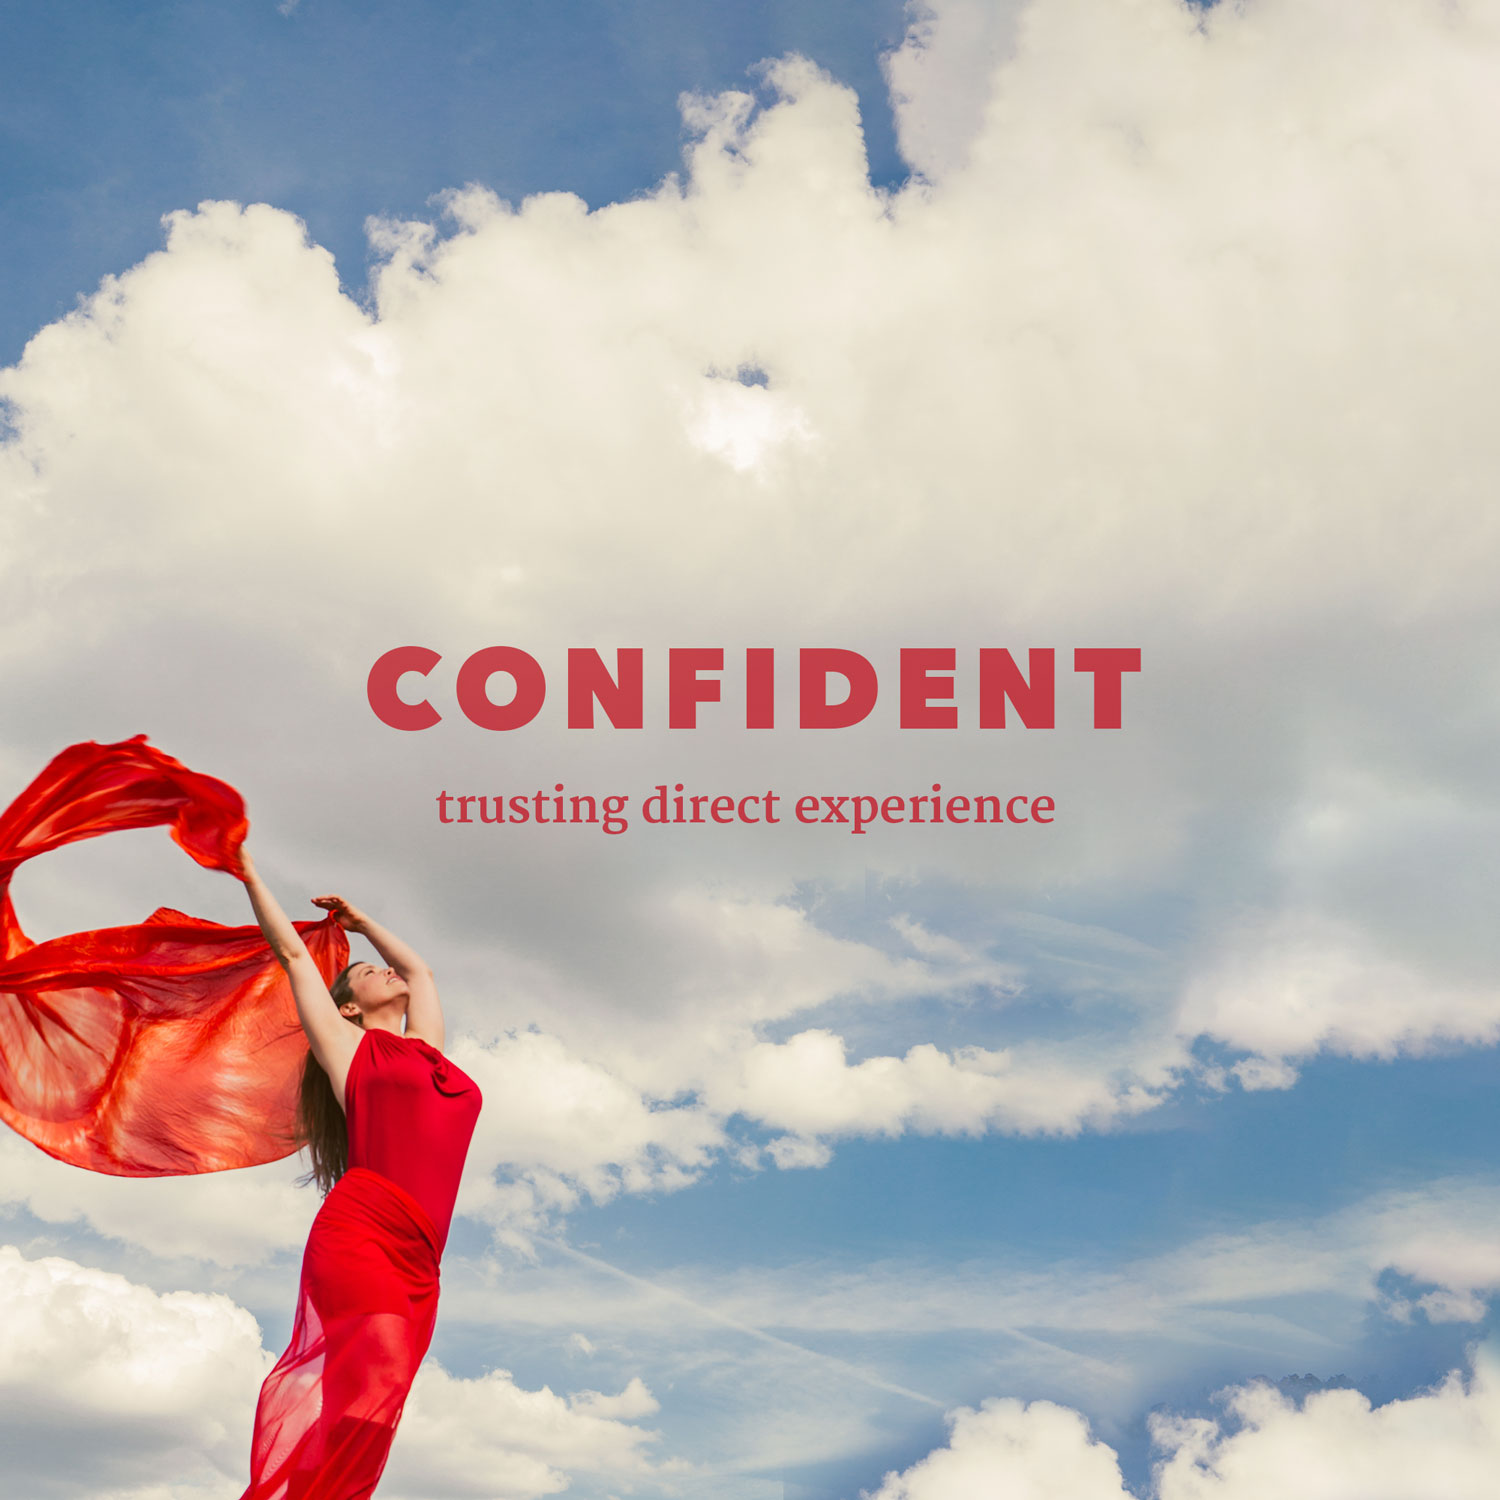 CONFIDENT - trusting direct expeirence